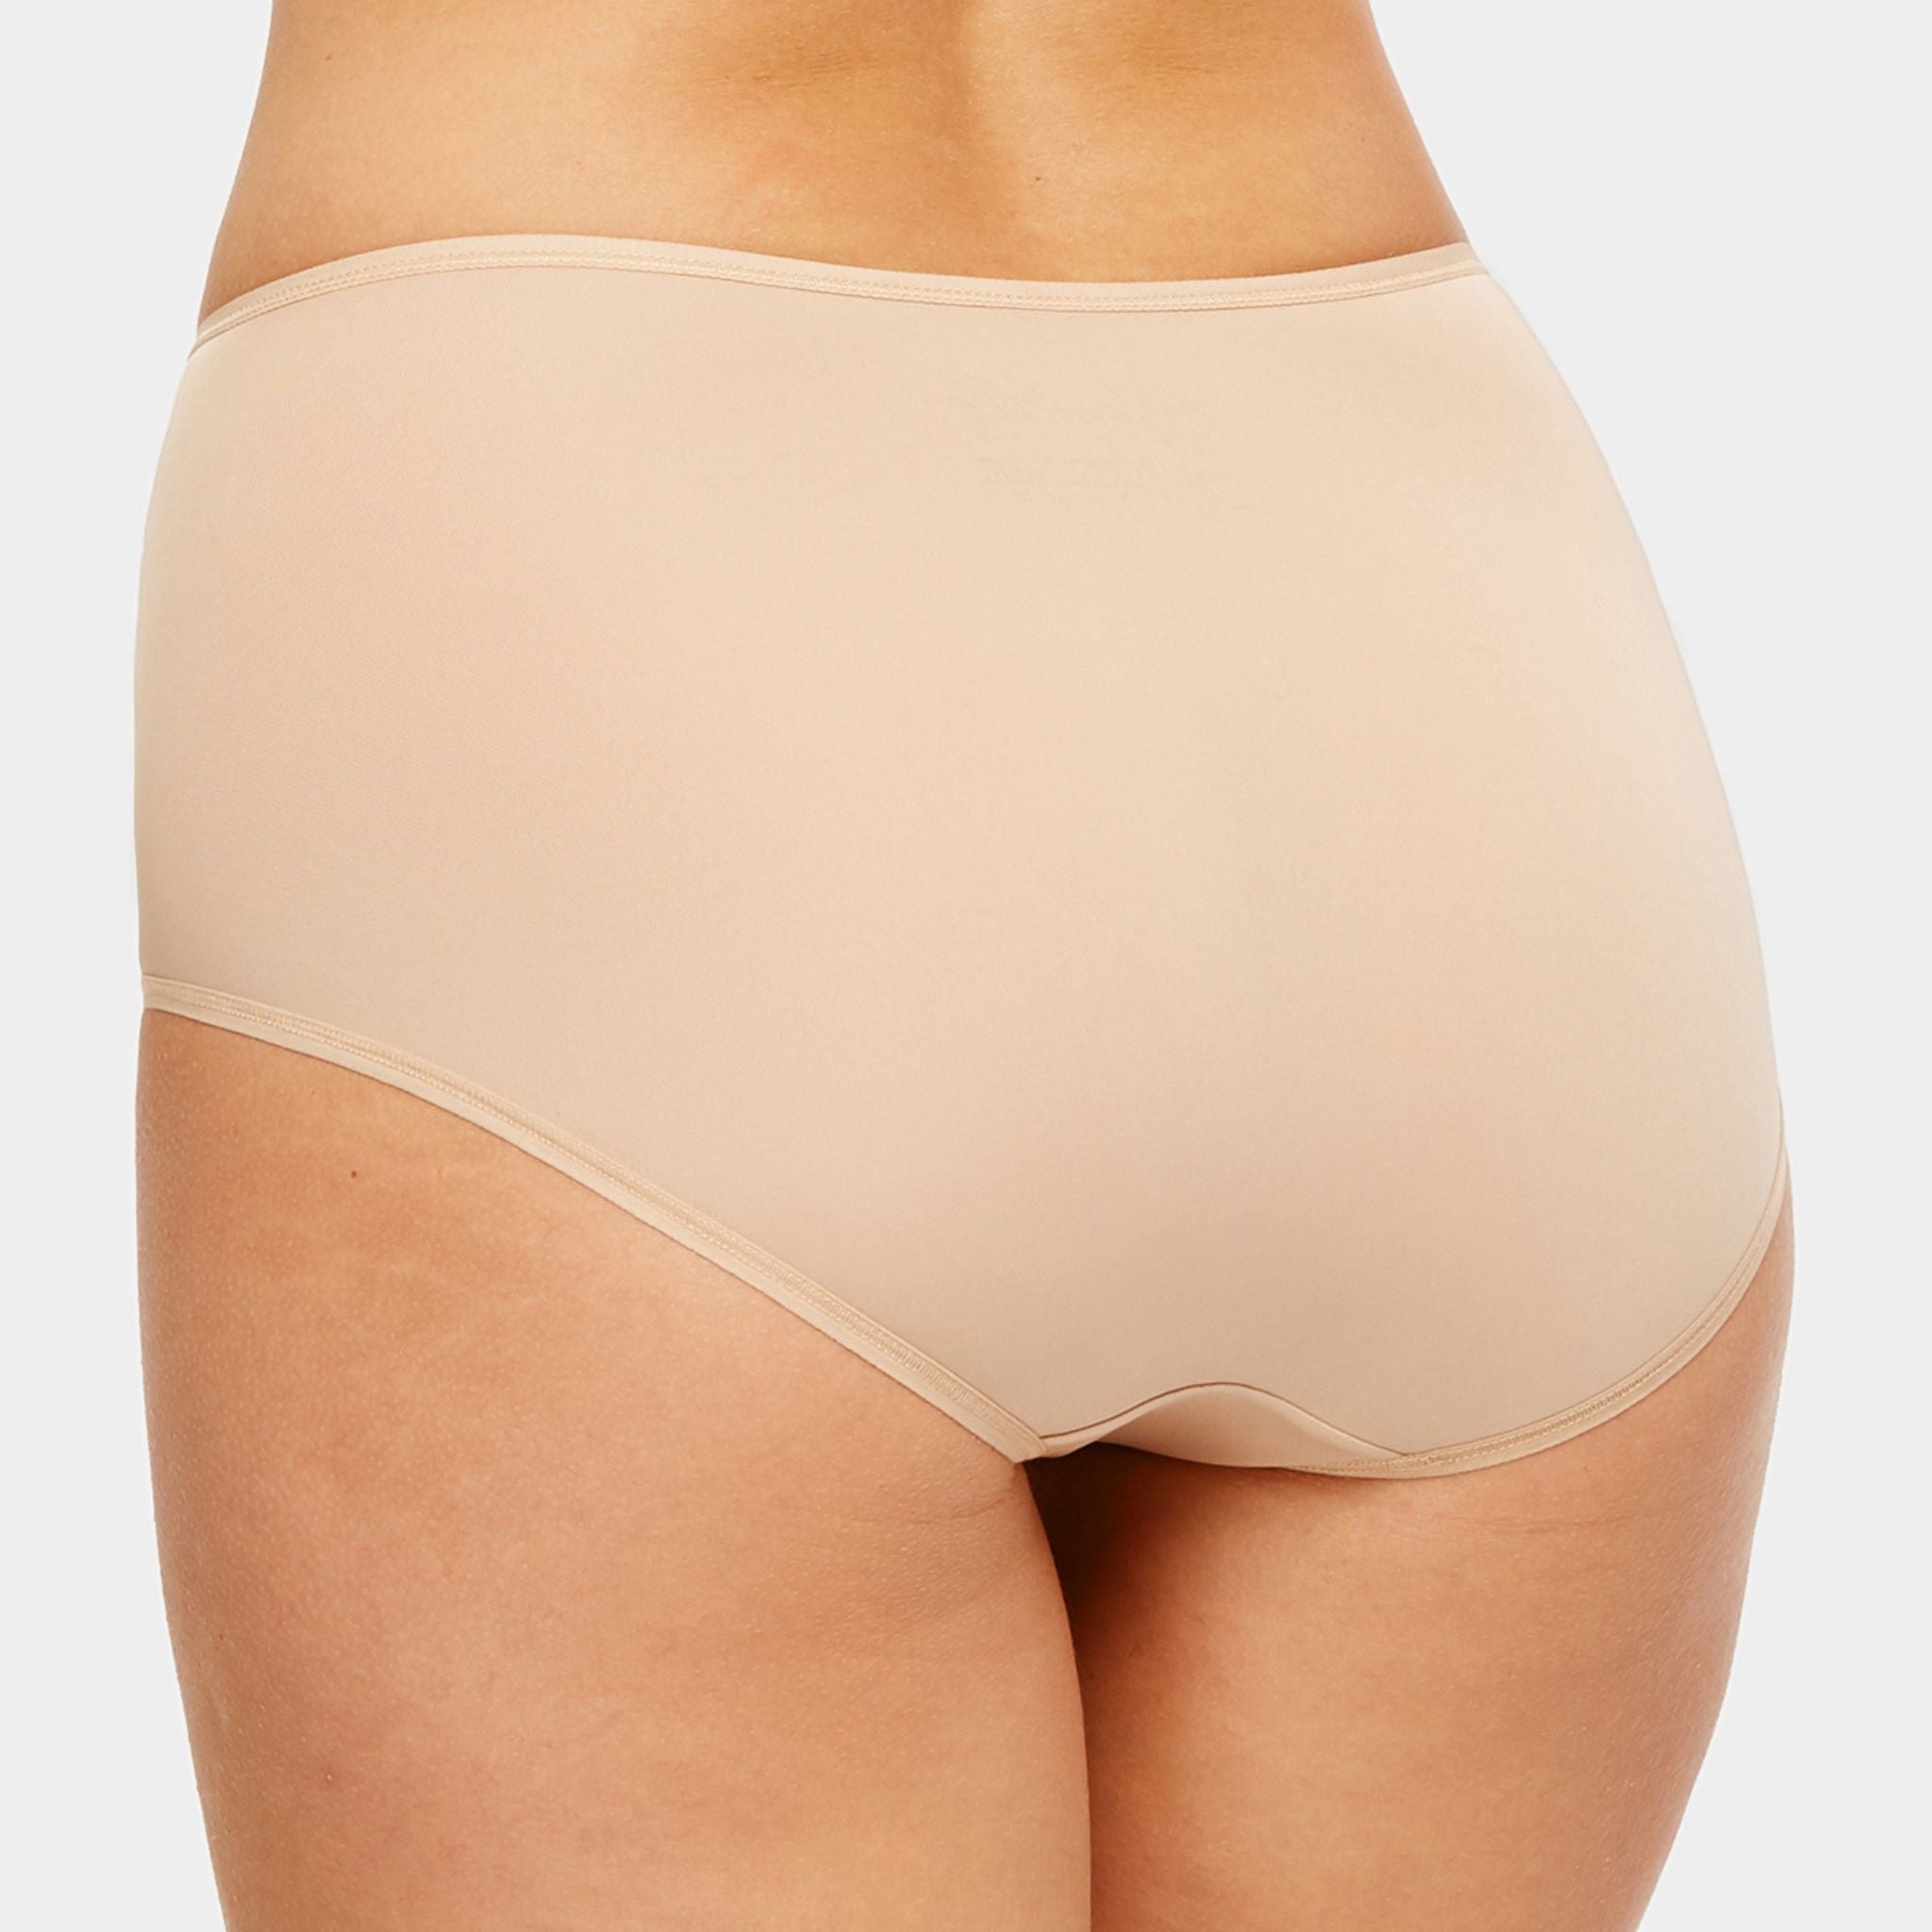 The new retro-inspired high waist design Smoothing Brief features a front panels lined with soft touch power mesh for a light smoothing effect. Ultra-flat elastics and no side seams give a barely-there look under any higher-waisted bottoms, skirts or dresses.